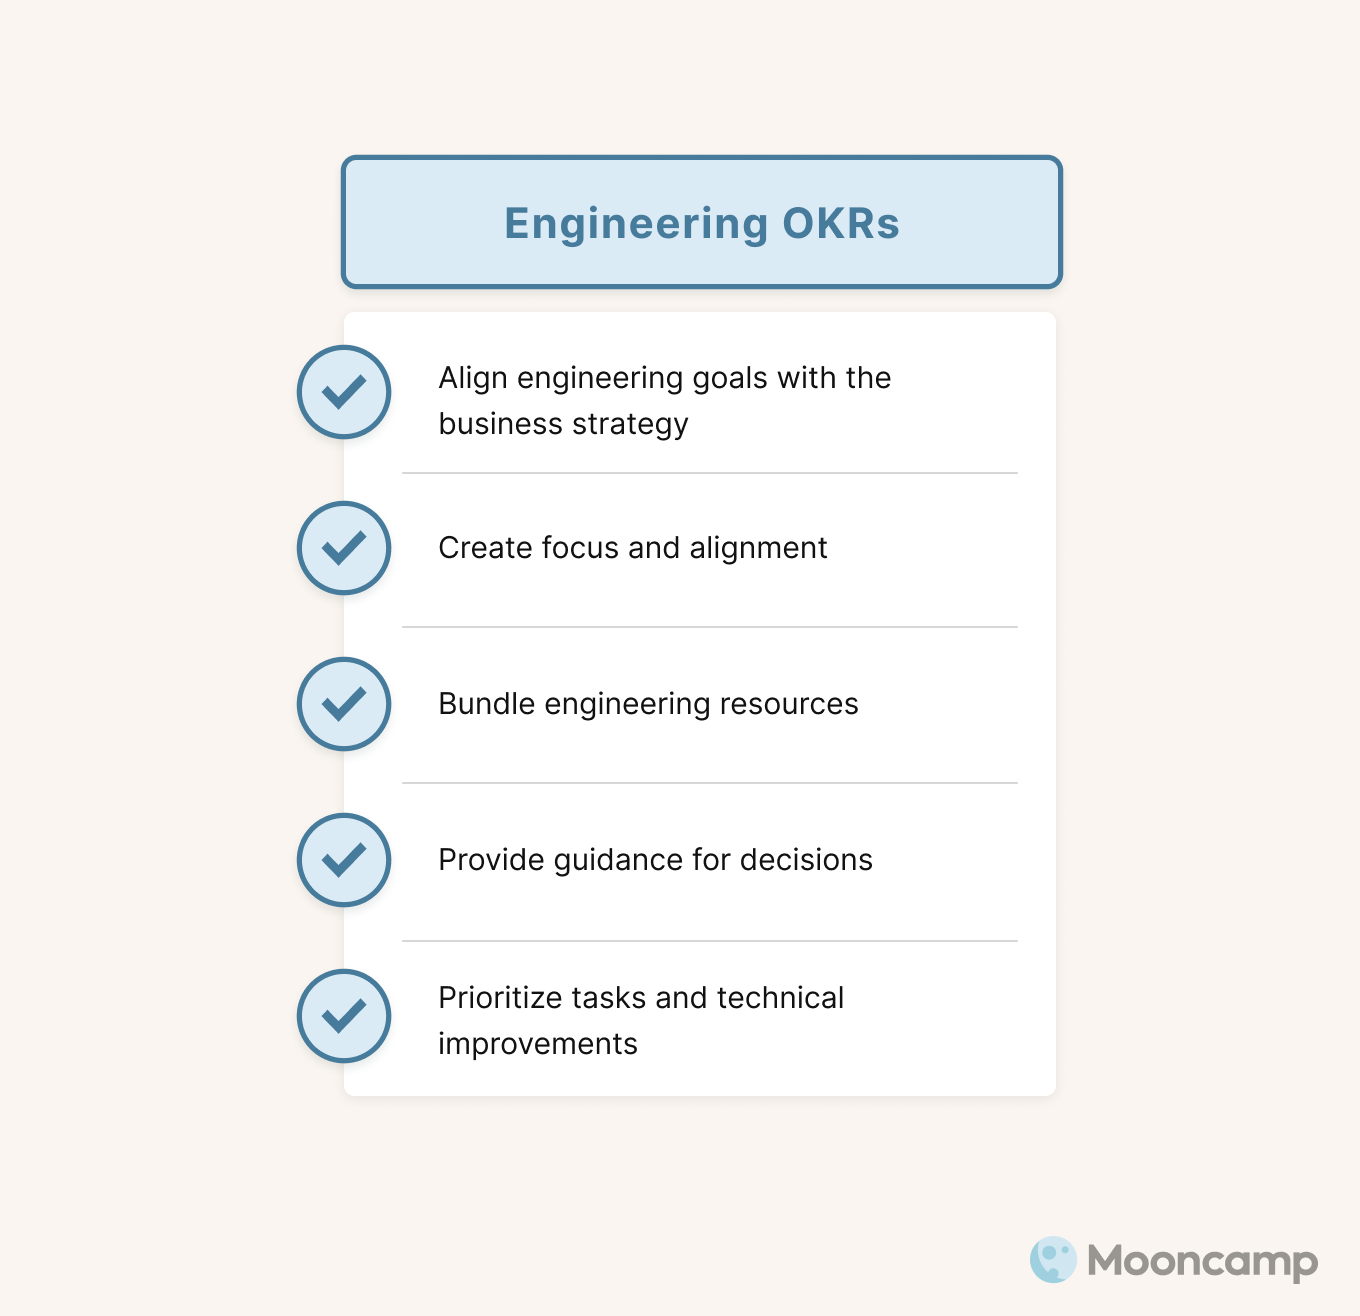 The benefits of engineering OKRs